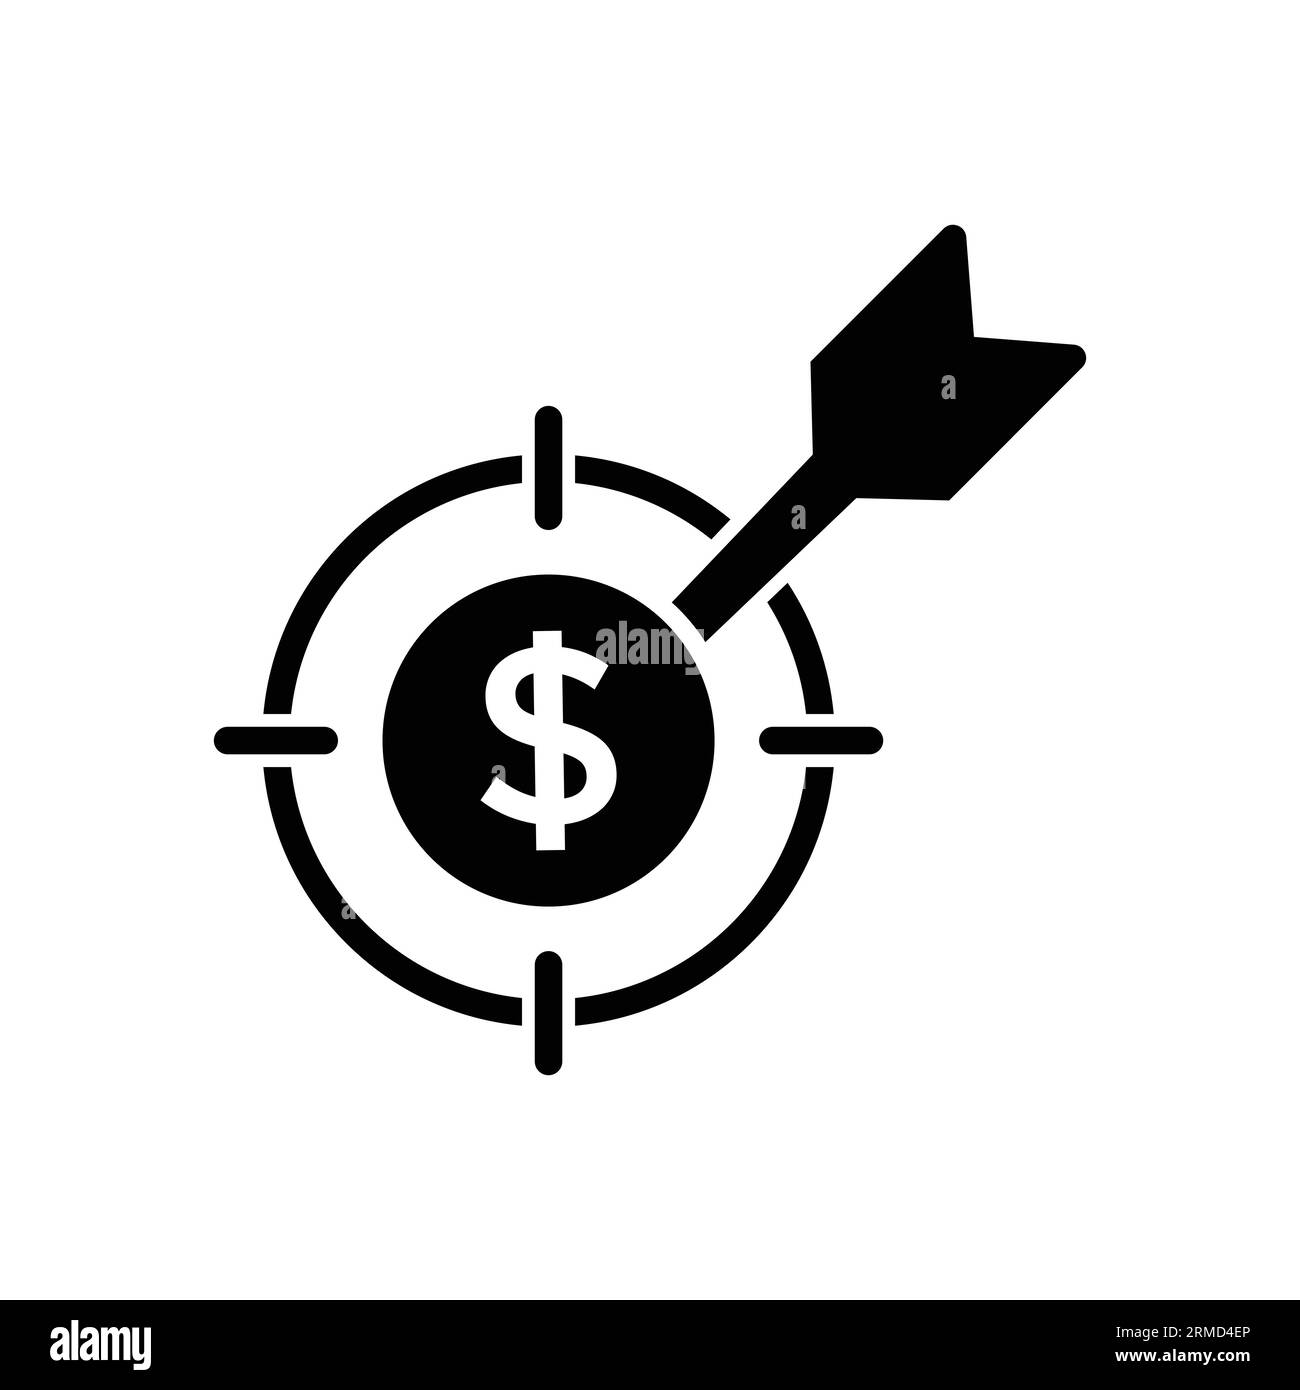 Business strategy sign icon design vector Stock Vector